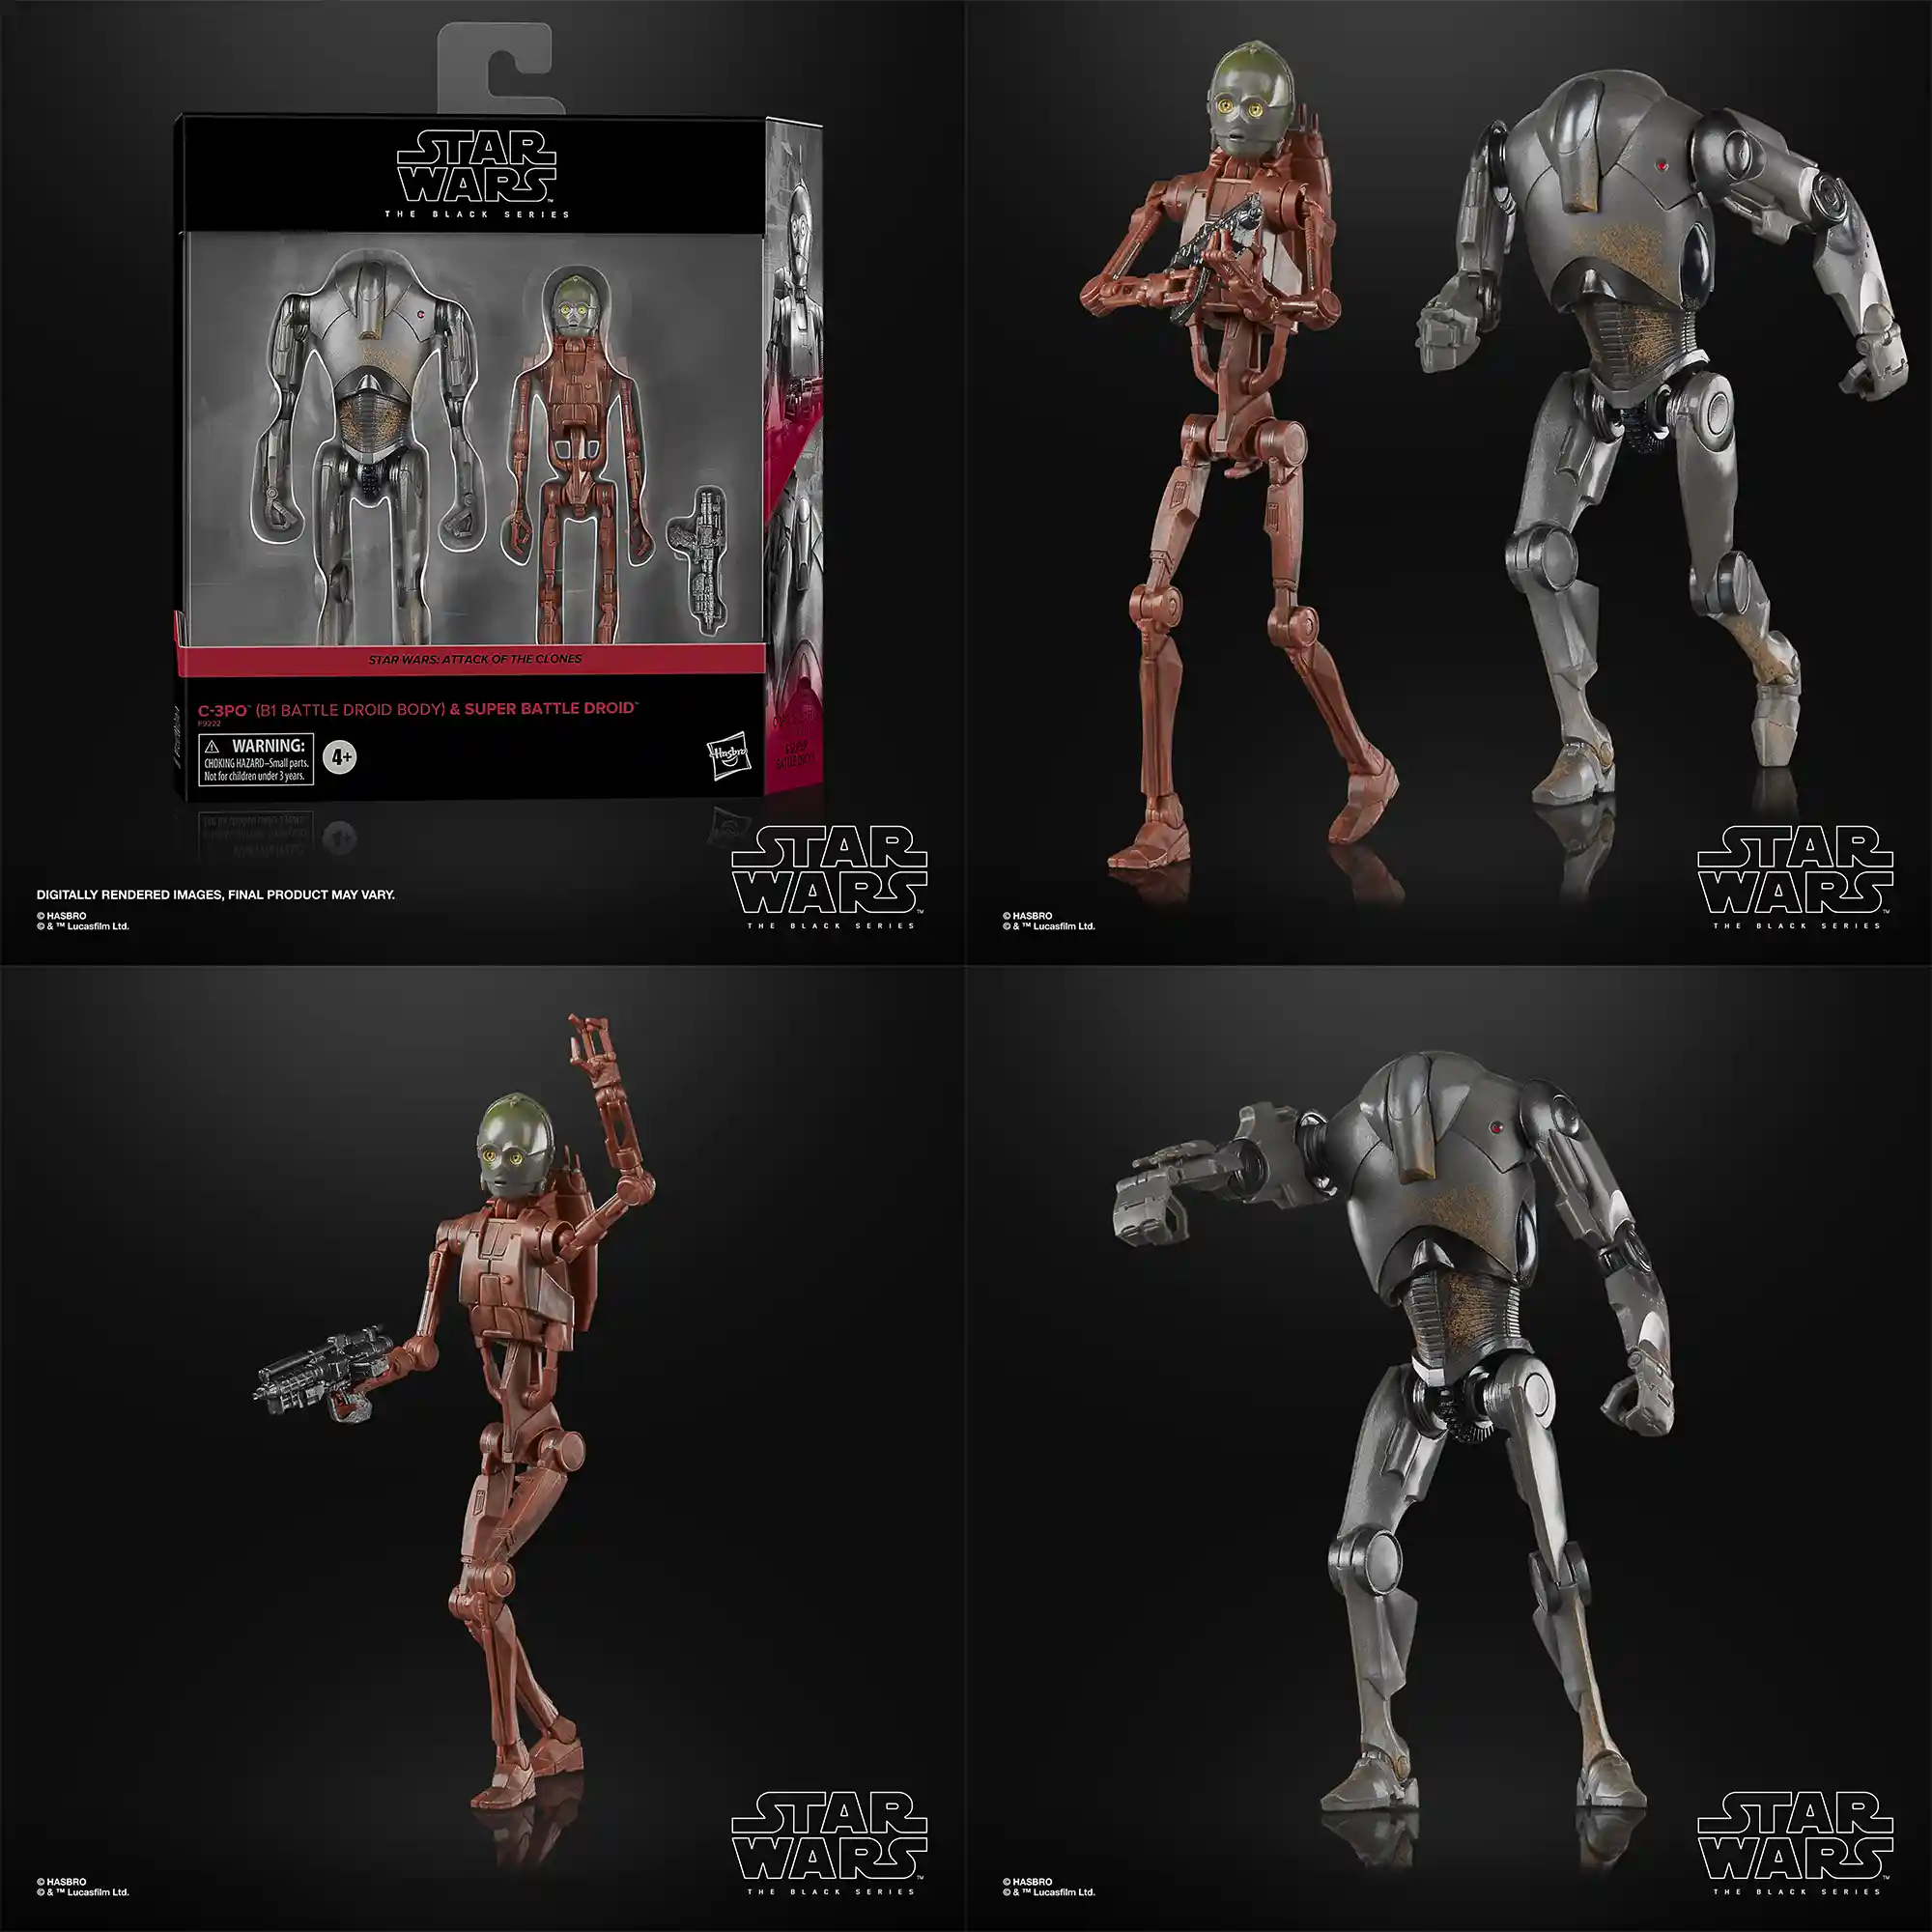 Star Wars The Black Series Super Battle Droid and C-3P0